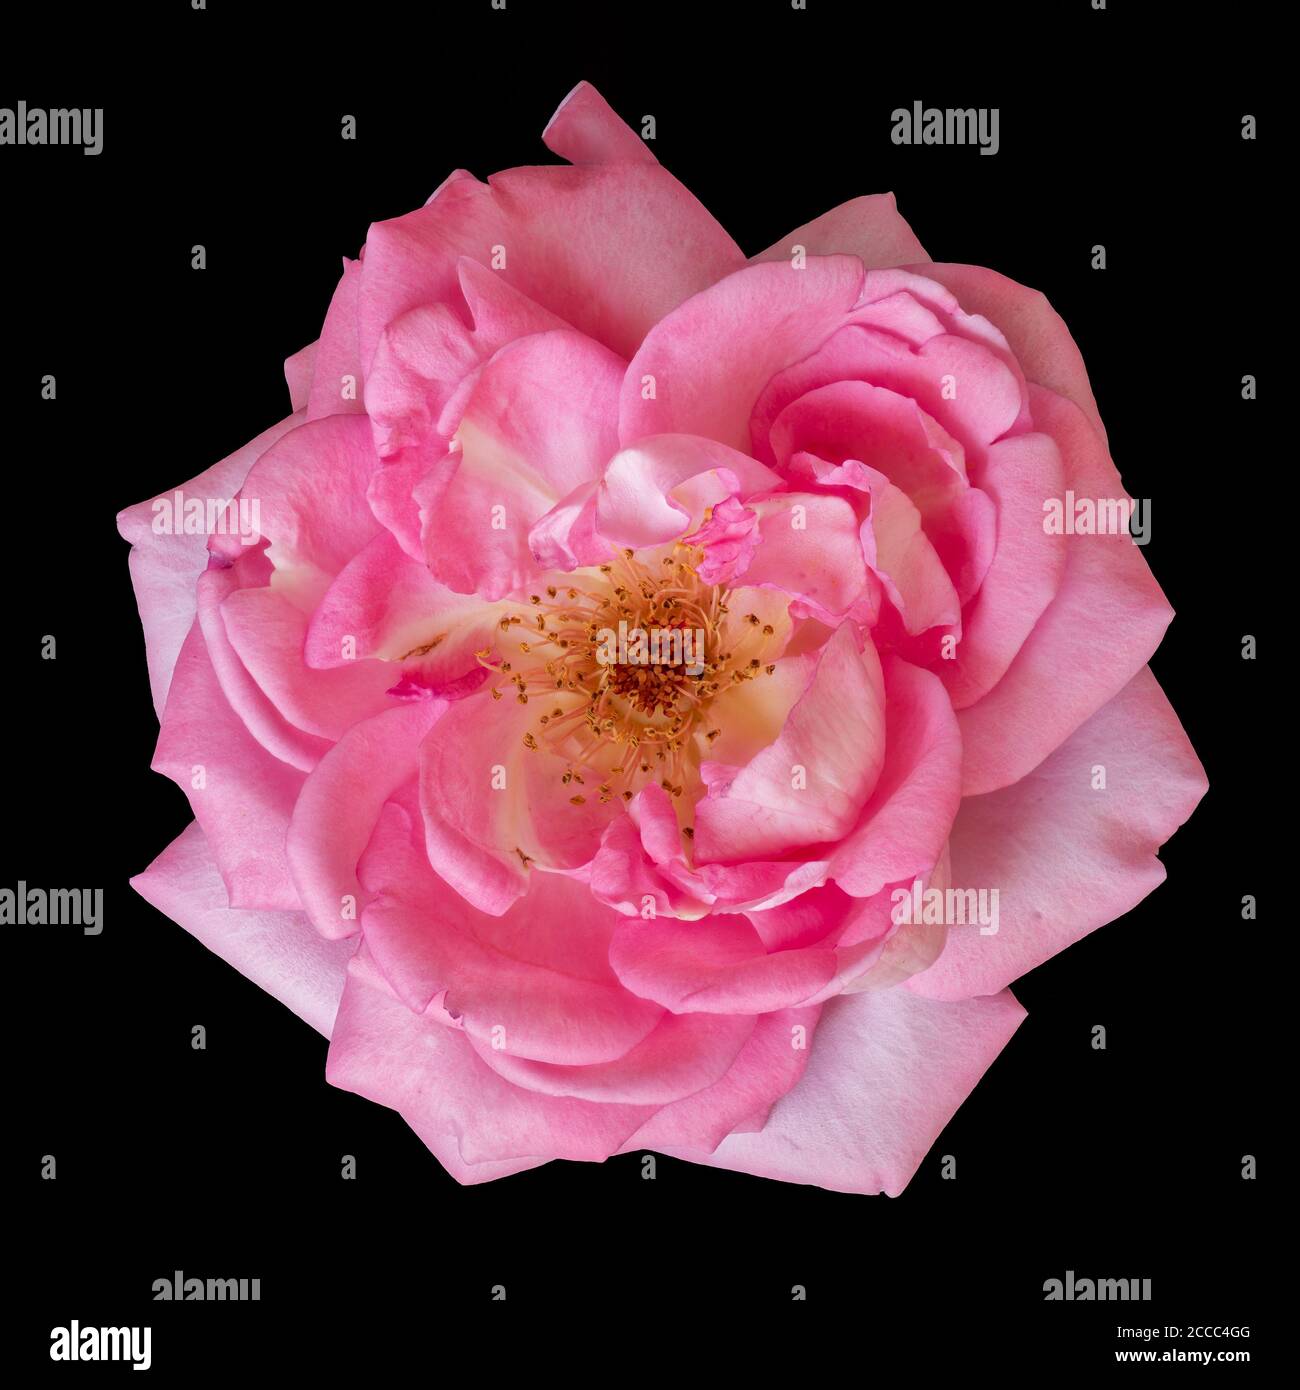 bight rose macro of a single isolated pink blossom in vintage painting style on black background Stock Photo